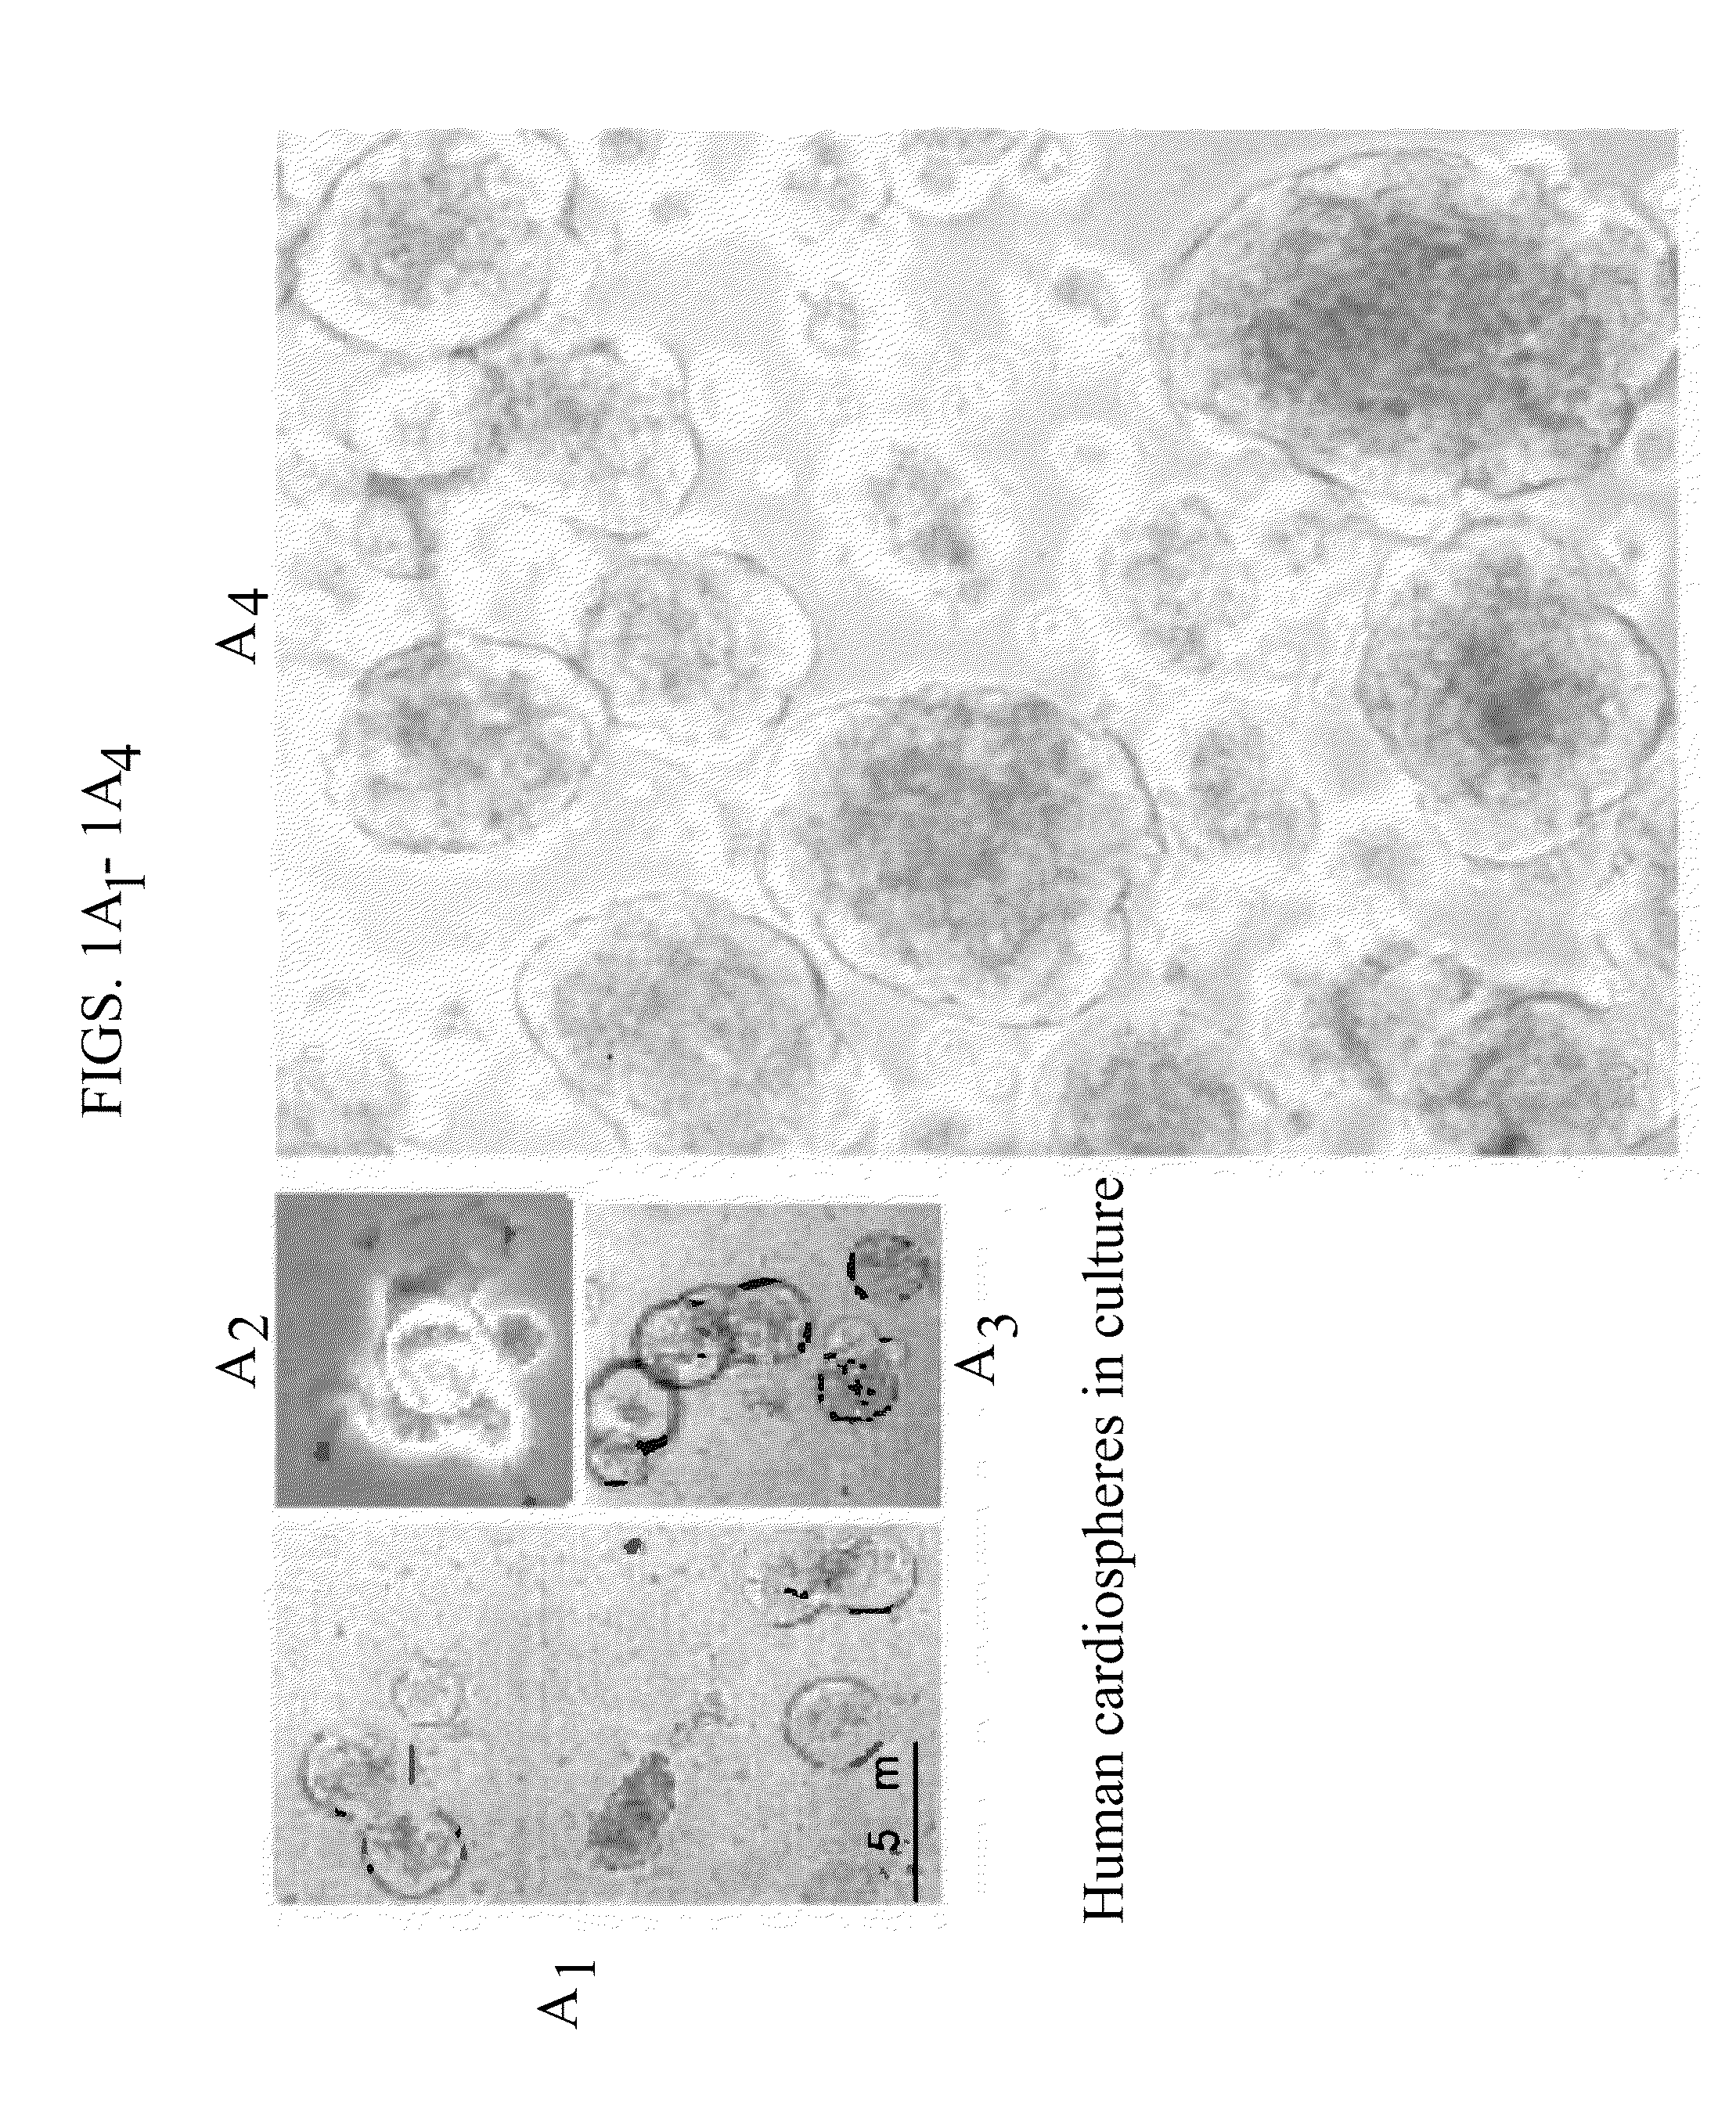 Cardiac stem cells and methods for isolation of same